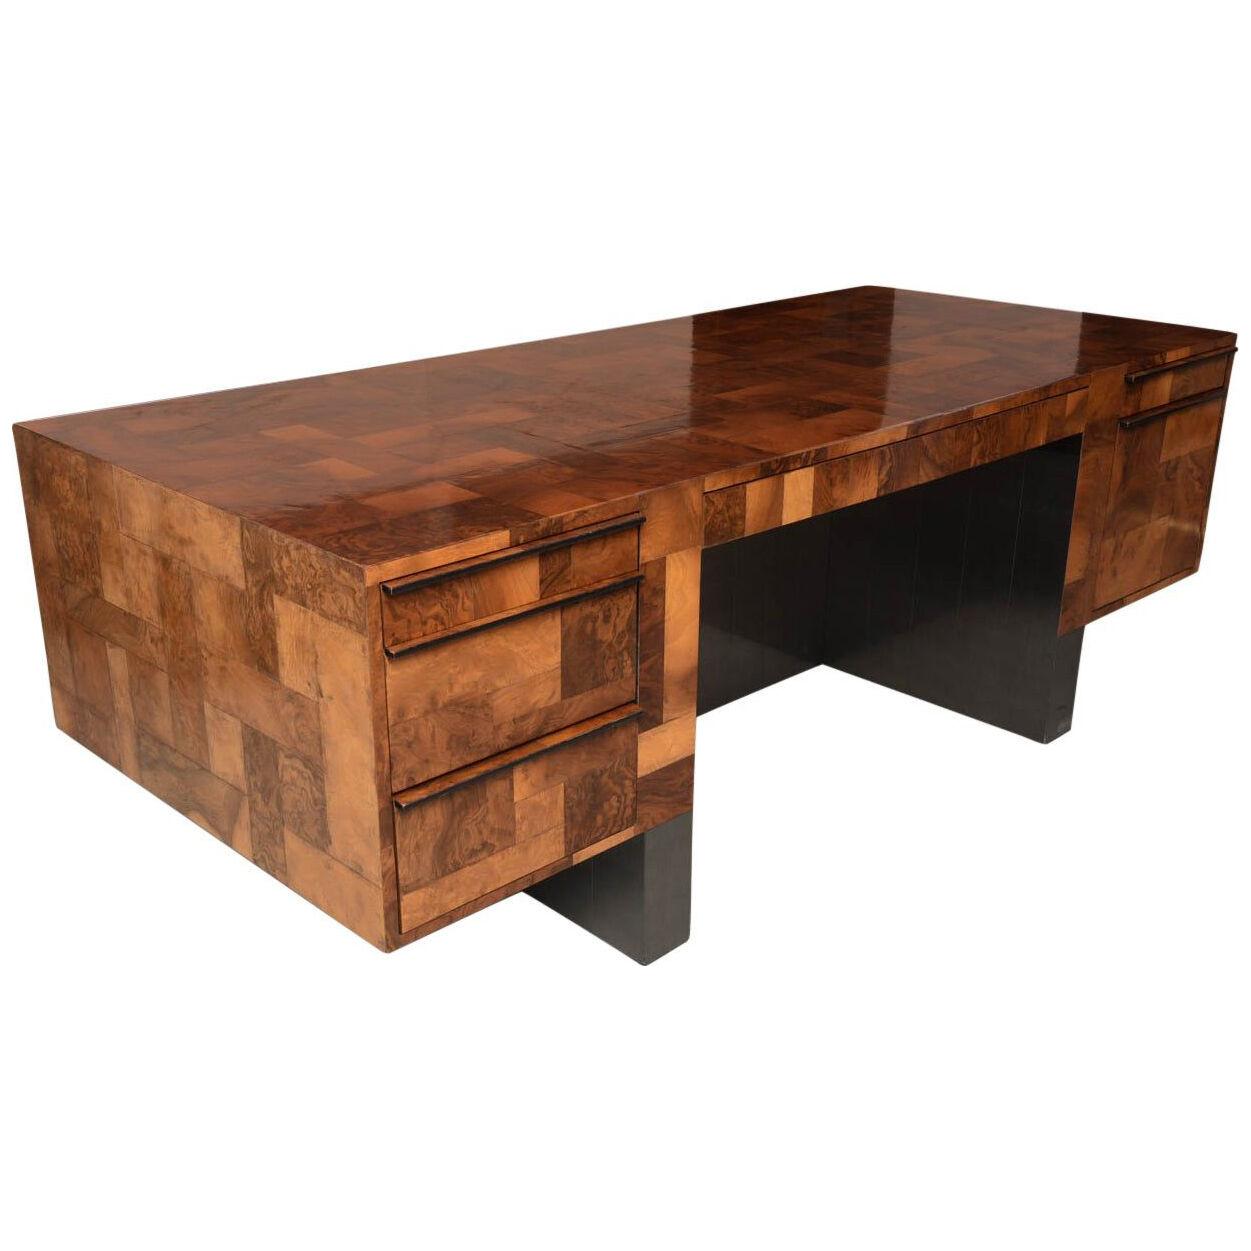 American Modern Burled Walnut and Pewter Cityscape Desk, Paul Evans